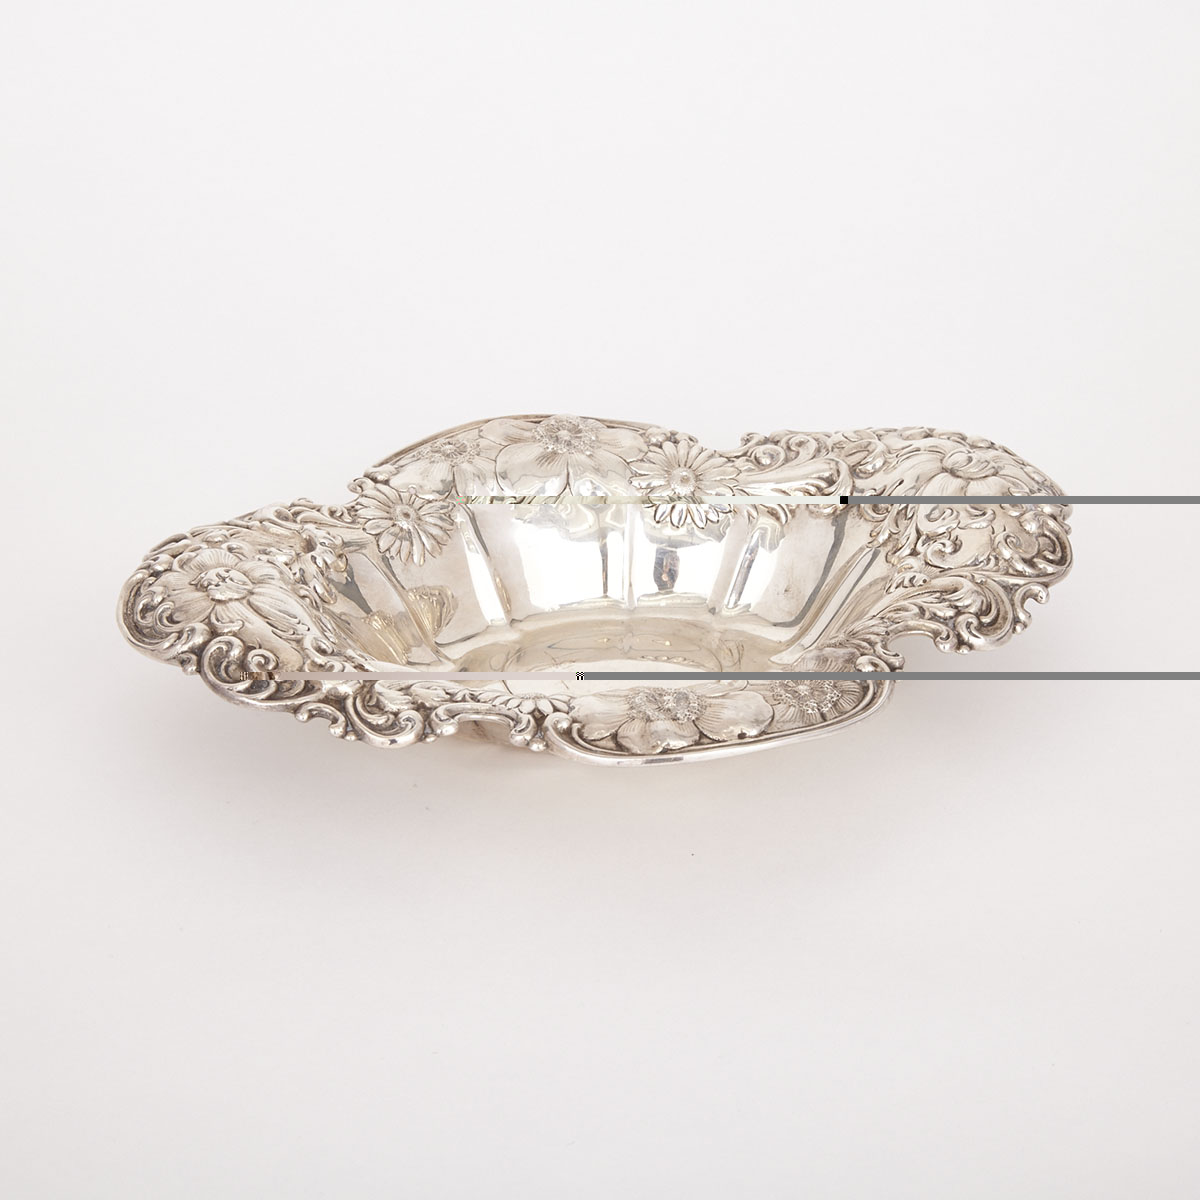 American Silver Oval Berry Bowl, Whiting Manufacturing Company, New York, N.Y., c.1900